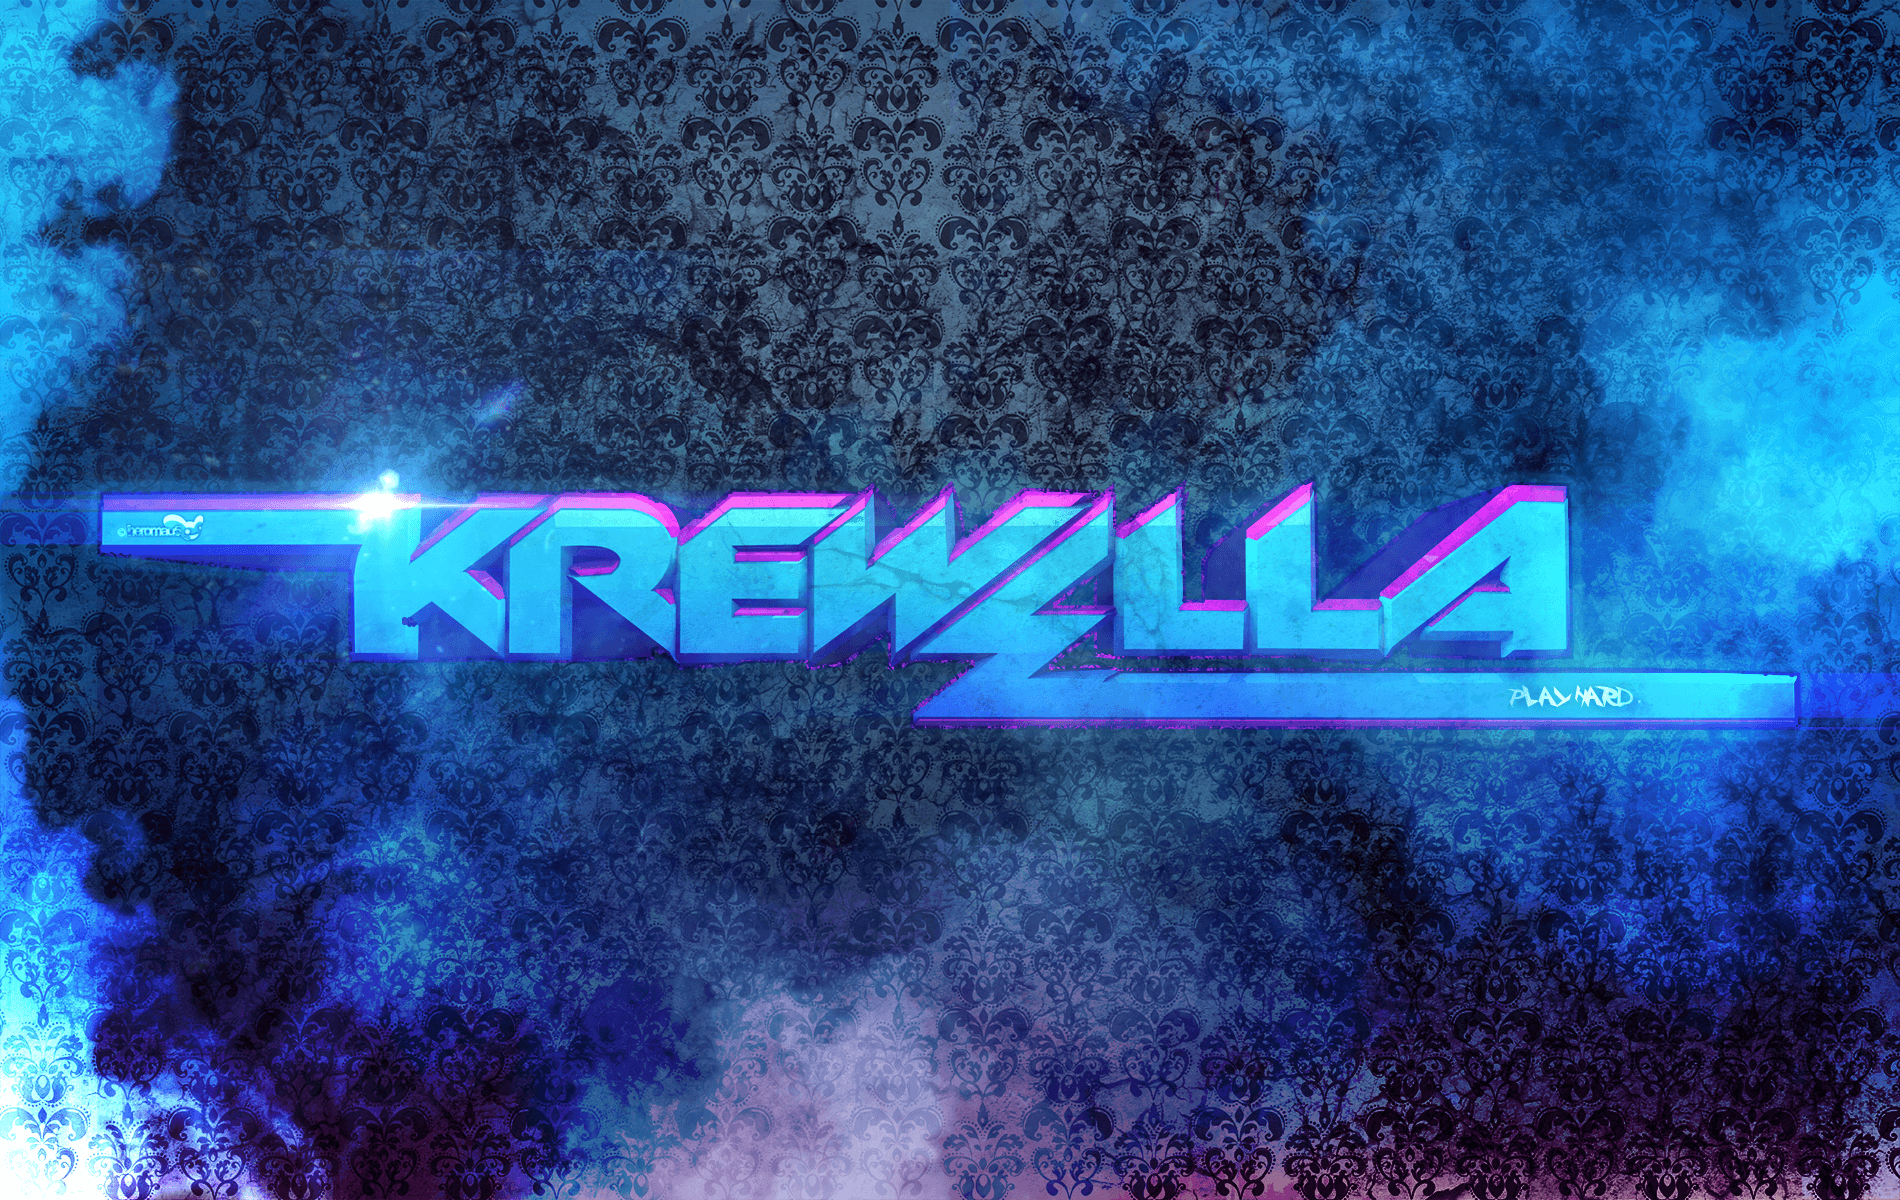 krewella image Led on EDM HD wallpapers and backgrounds photos